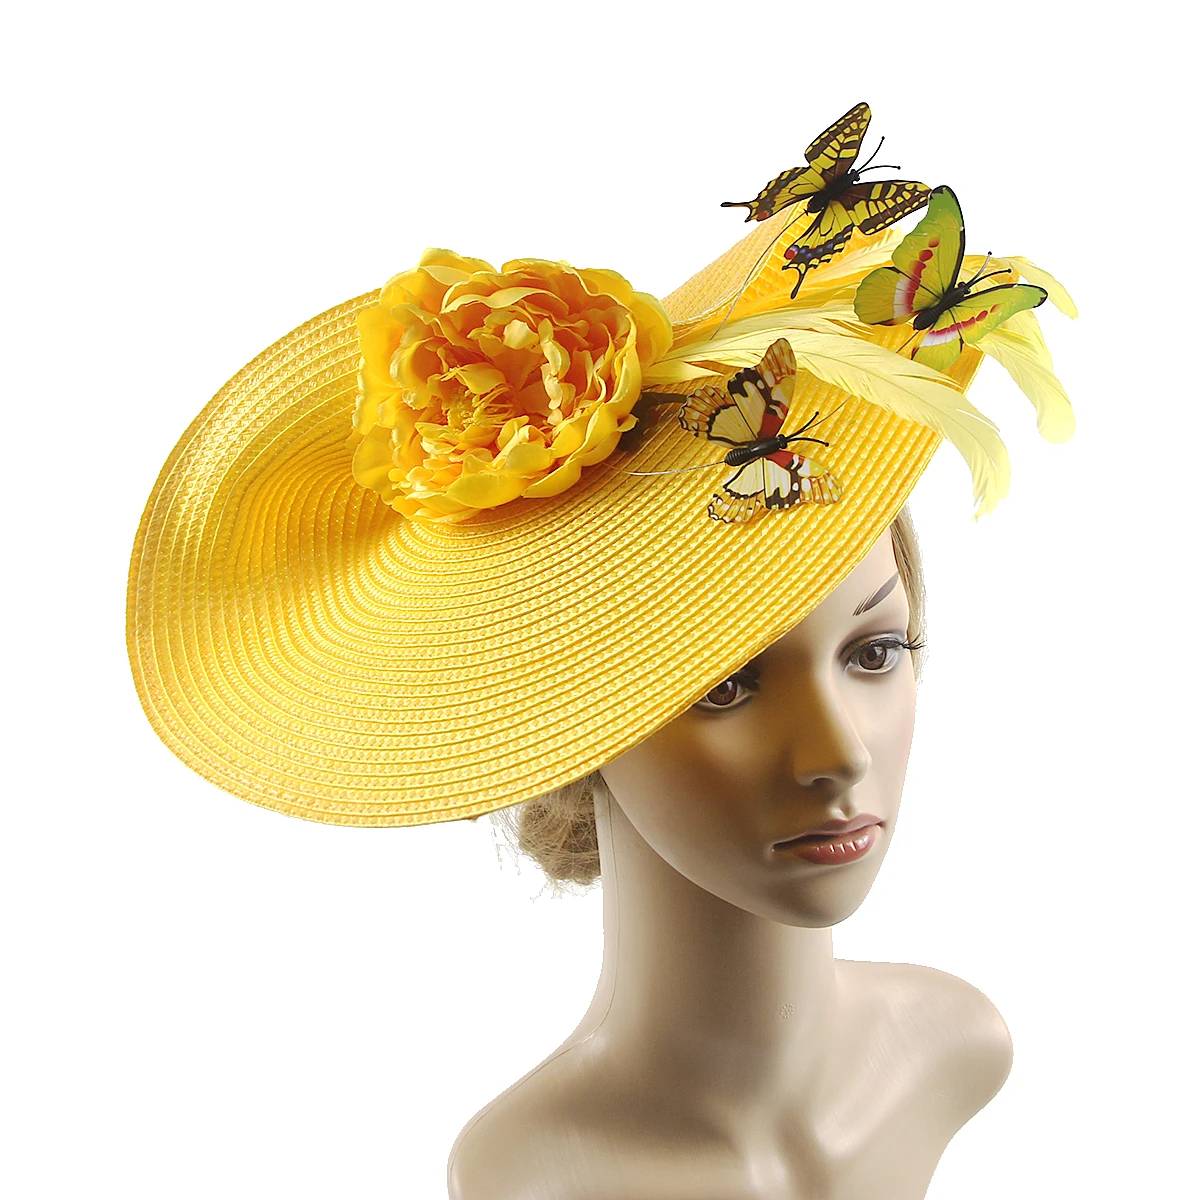 Braided Fascinator Hat with Butterfly and Flower, Kentucky Derby Big Hat Jockey Club Church Cocktail Tea Party Headwear 1